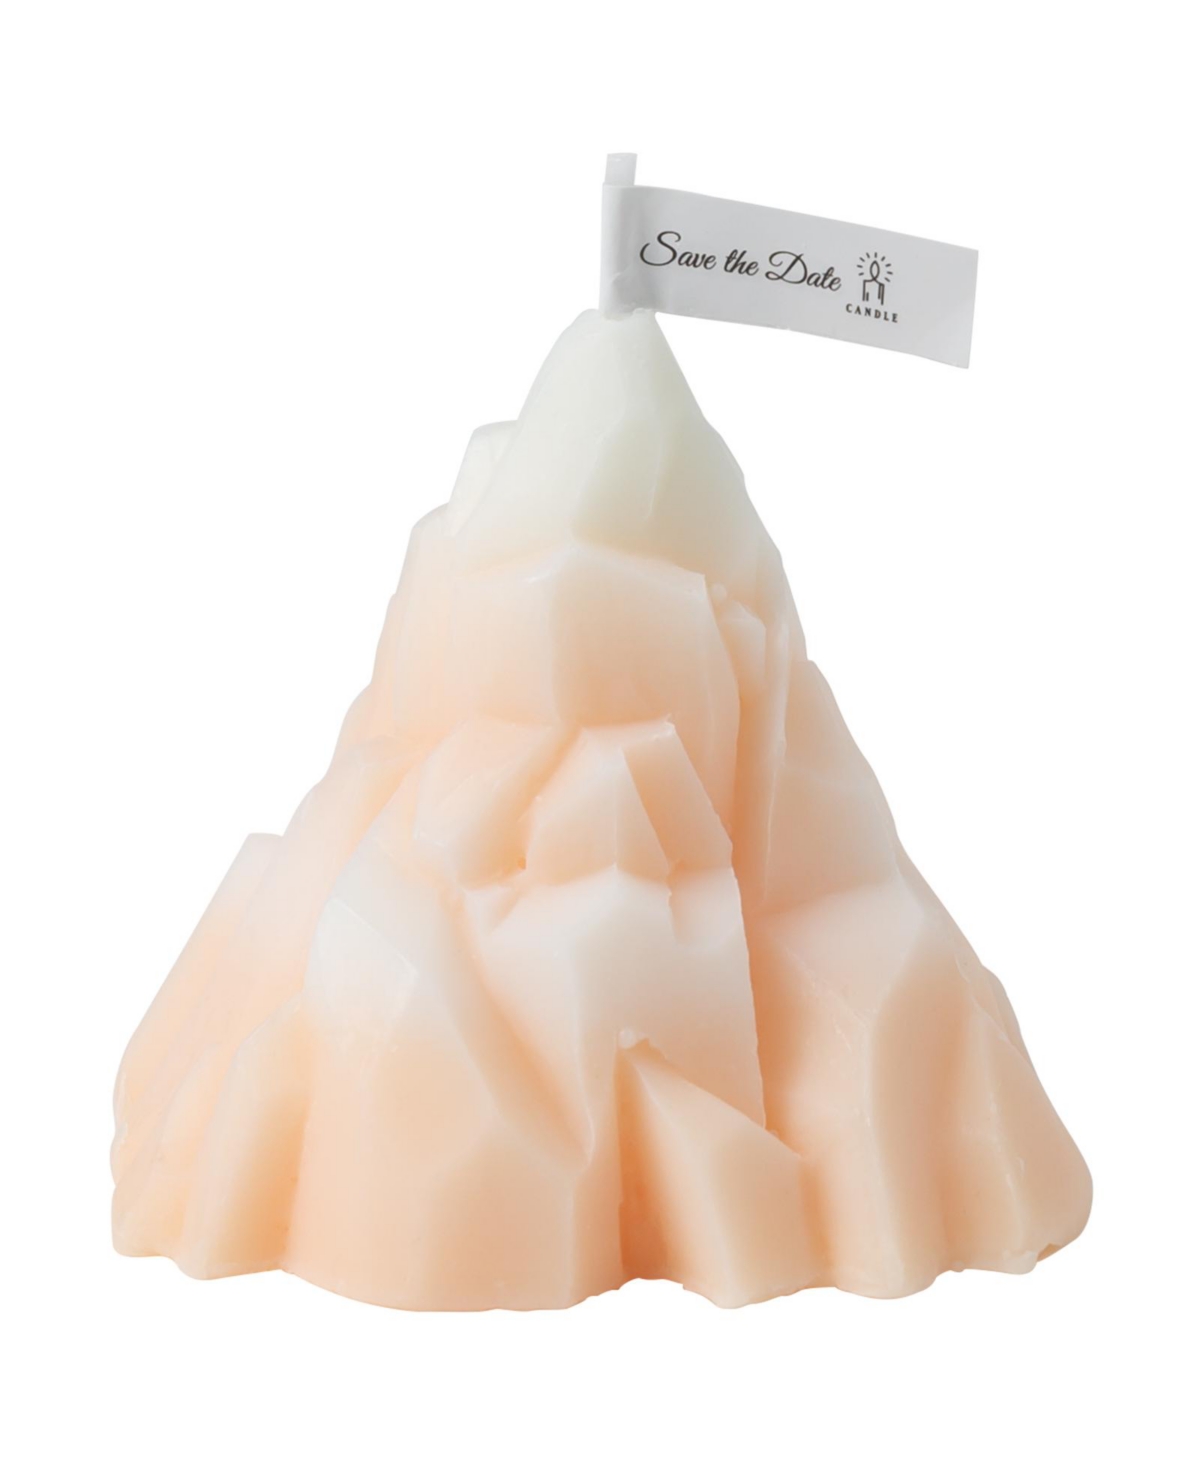 Iceberg 2.6" Scented Candle - Grey